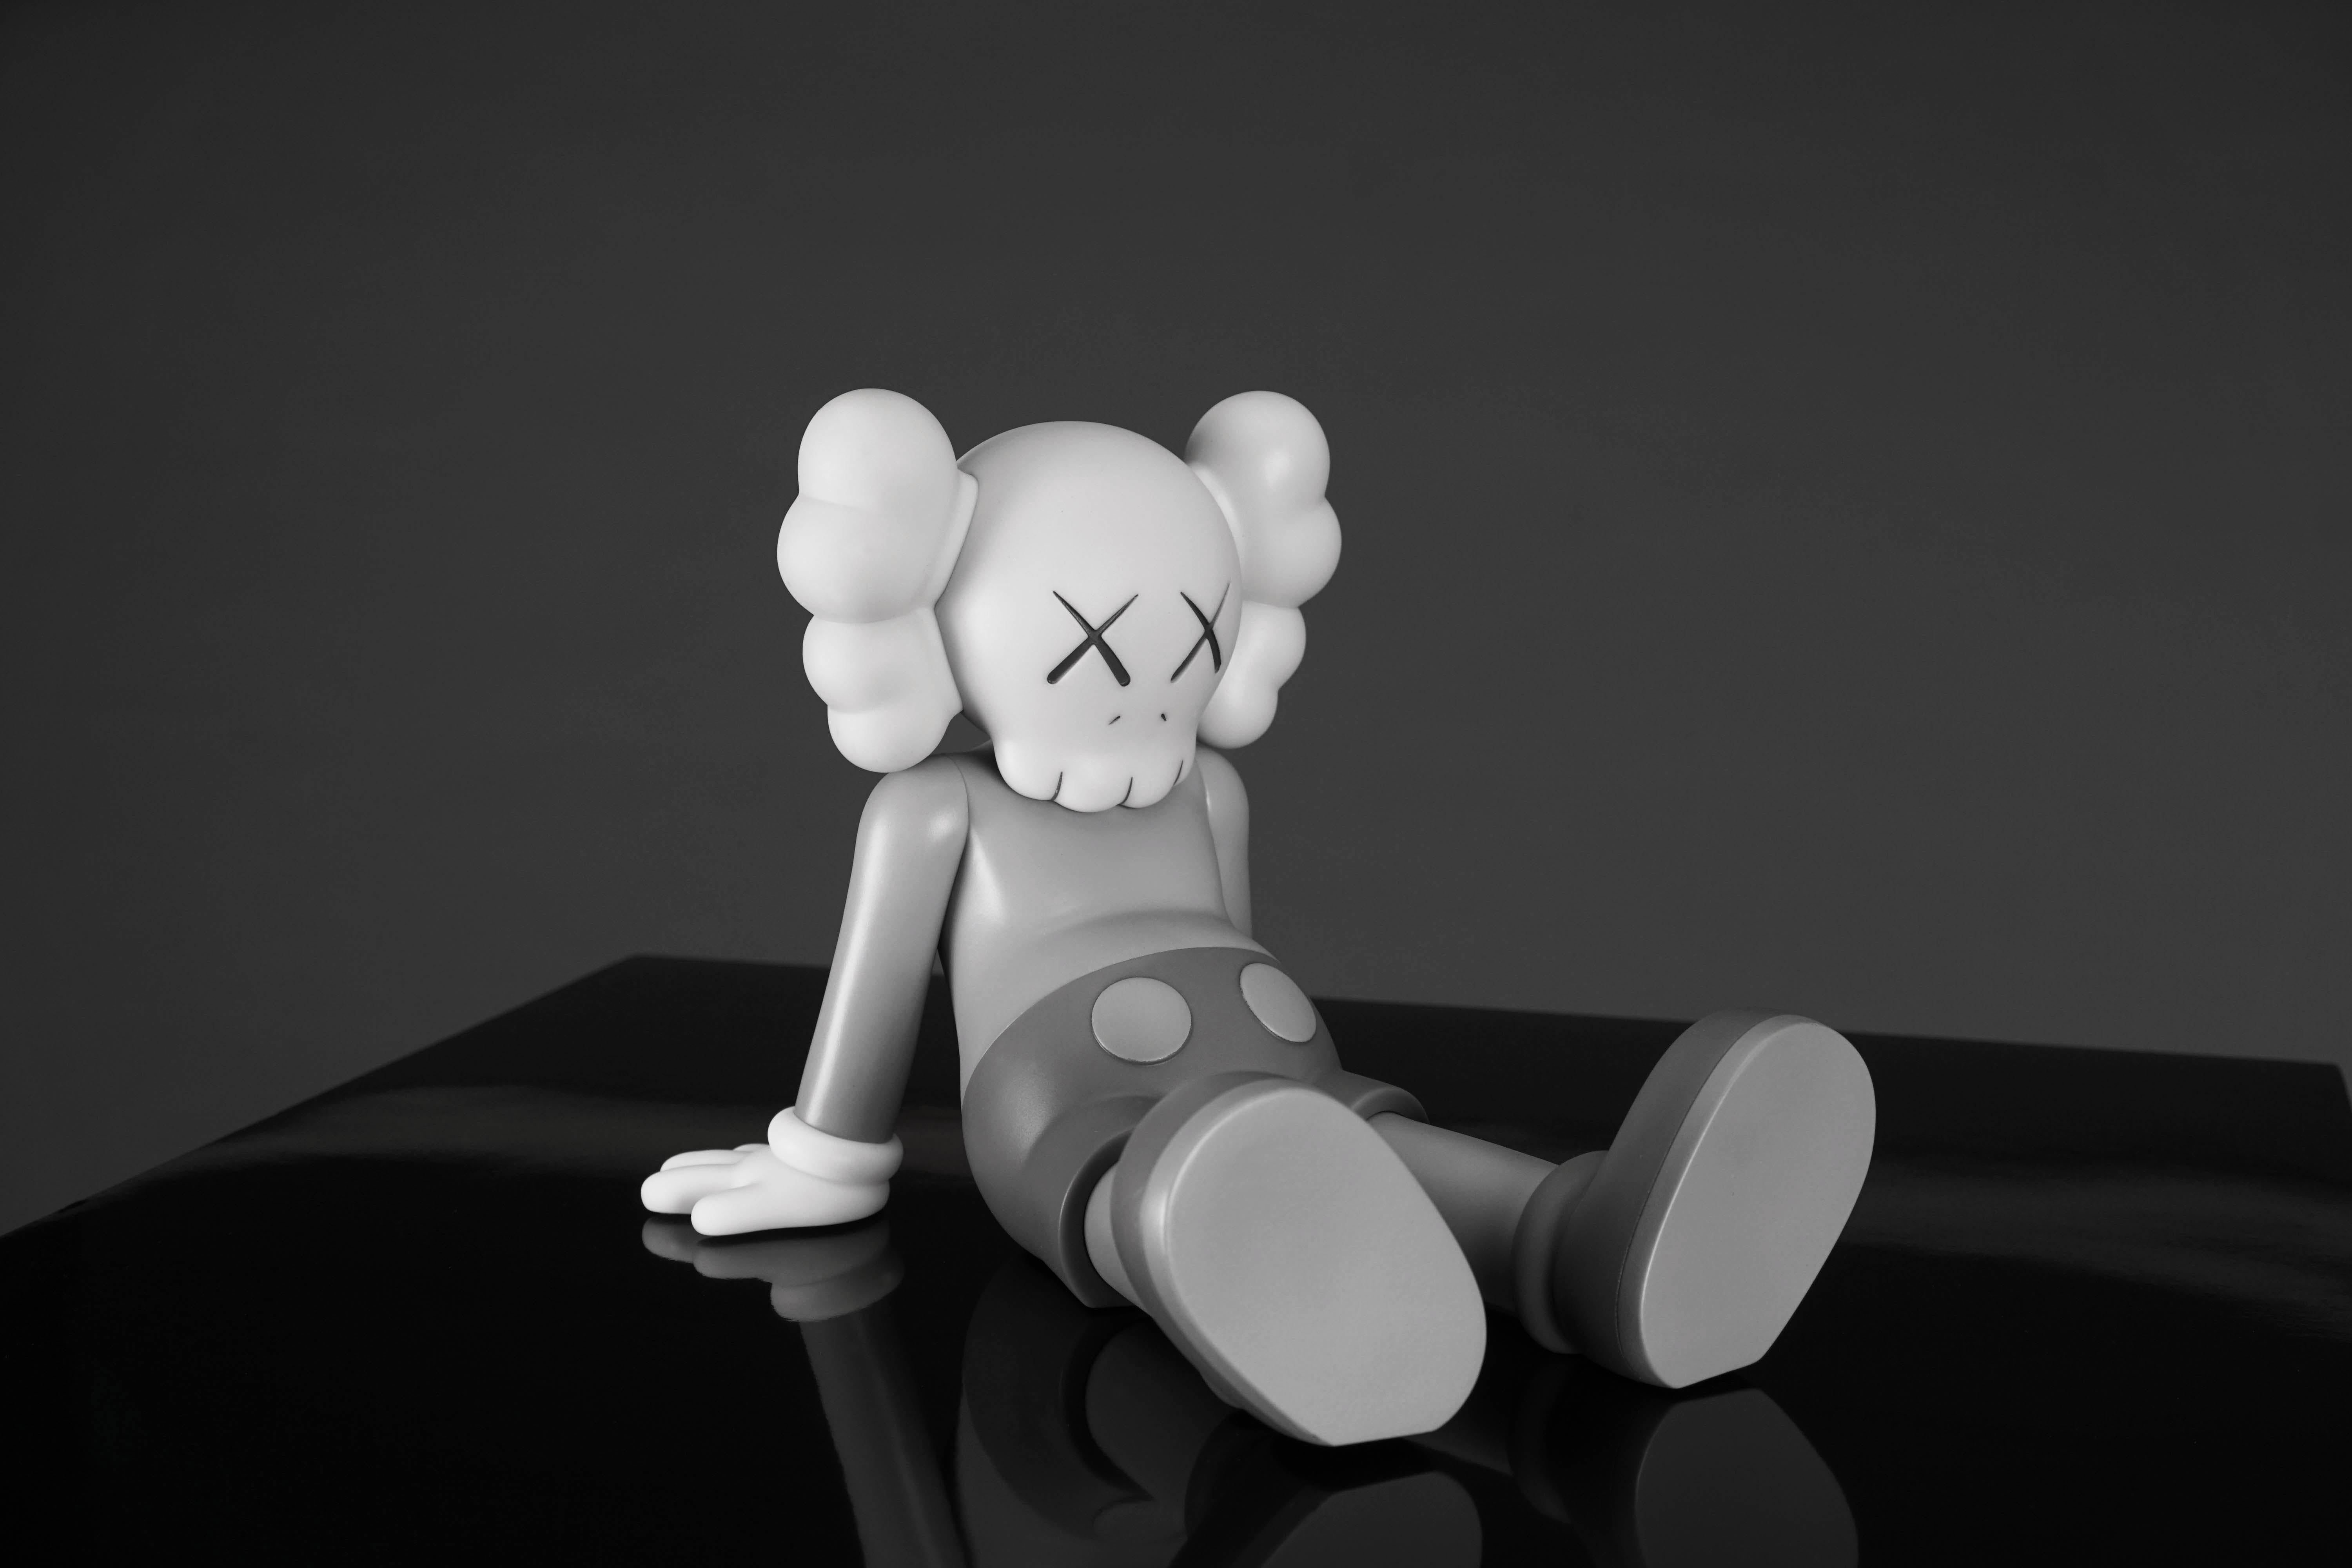 7" inch KAWS Holiday Vinyl Limited Toy Statue Figure Gift Black Color in Box 